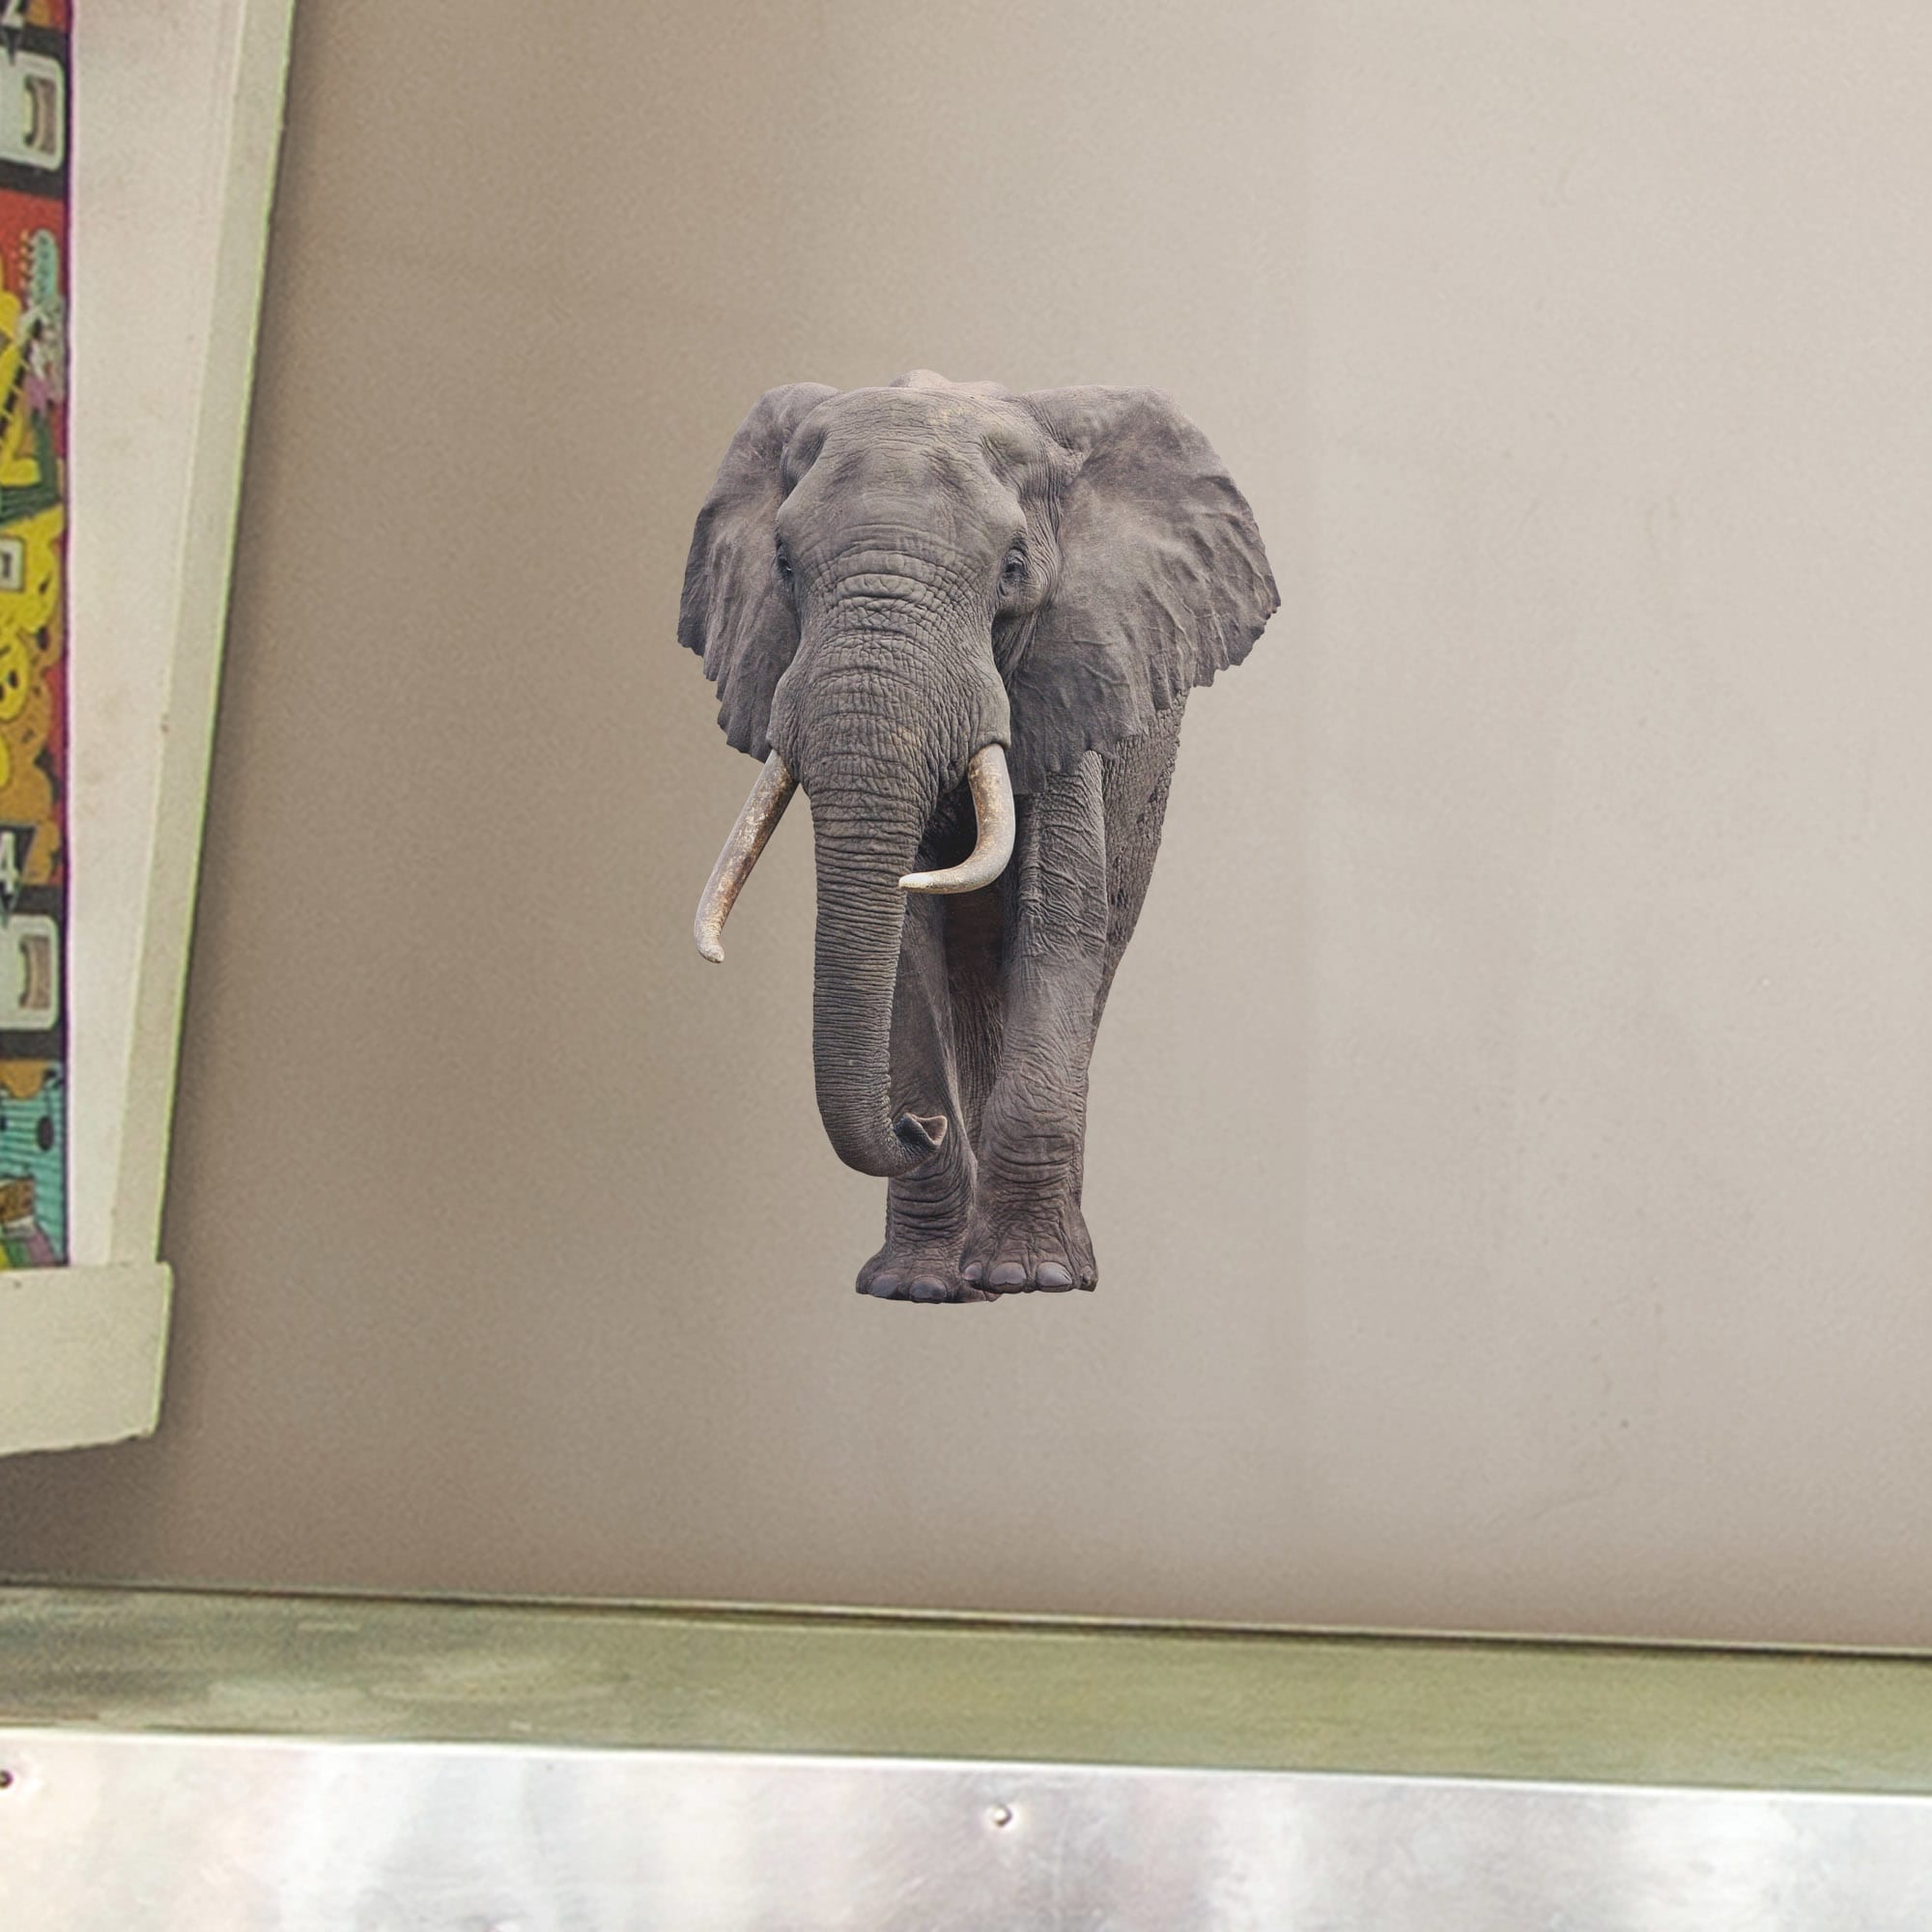 Elephant - Removable Vinyl Decal Large by Fathead